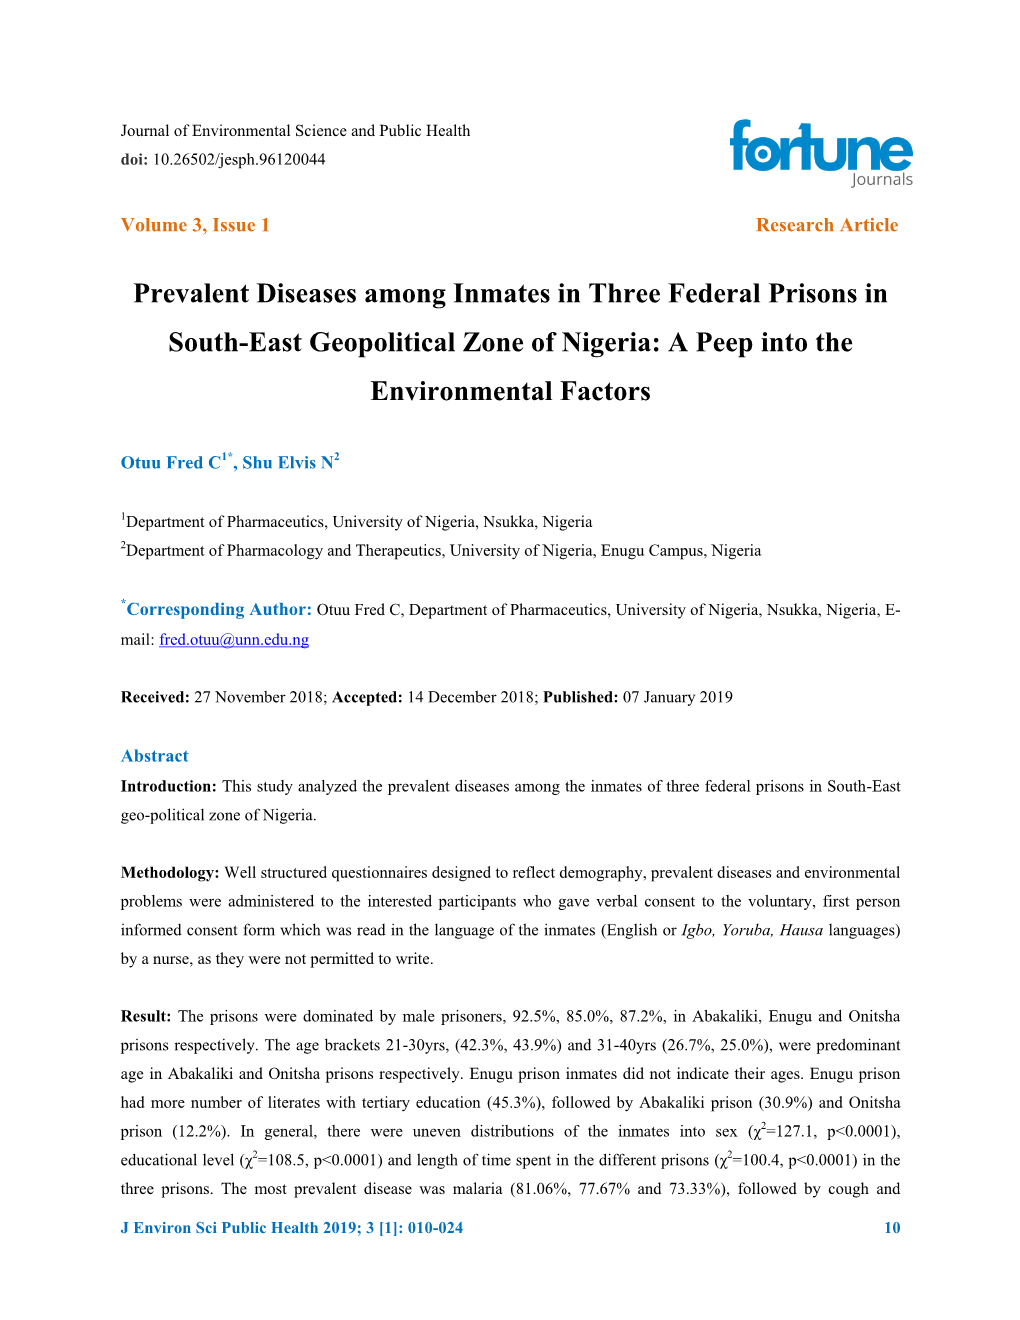 Prevalent Diseases Among Inmates in Three Federal Prisons in South-East Geopolitical Zone of Nigeria: a Peep Into the Environmental Factors